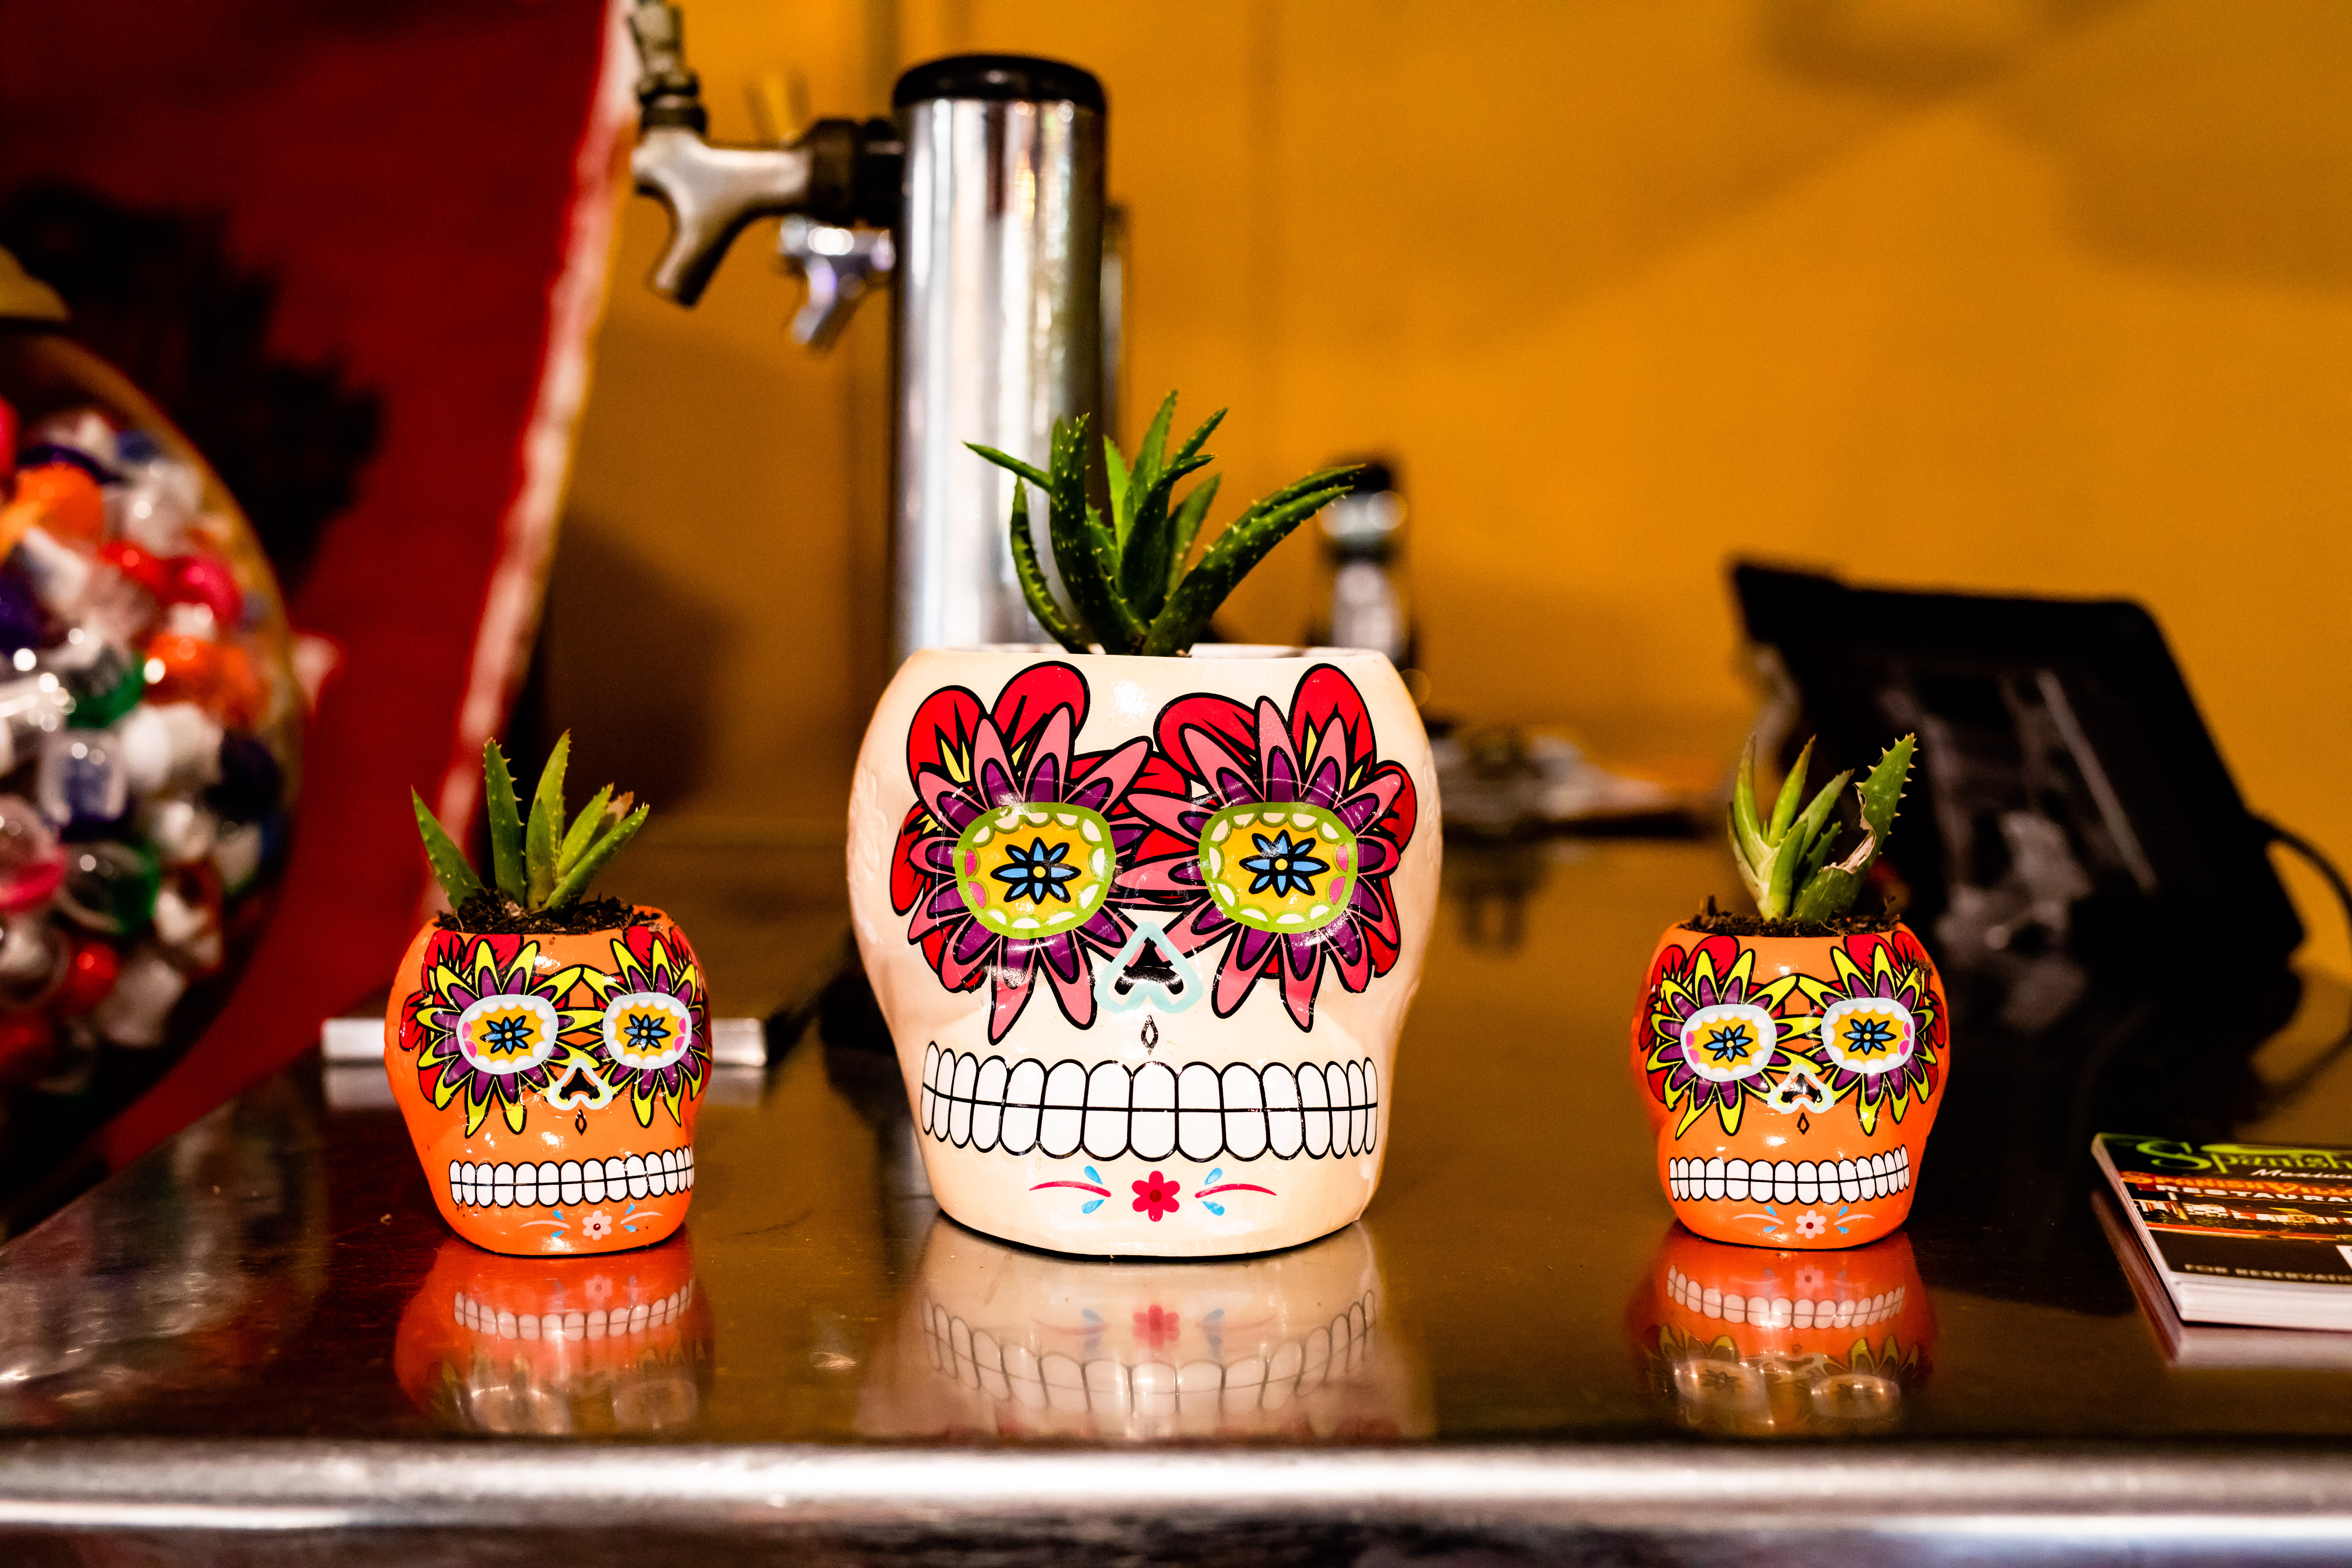 Planter pots decorated with skulls at Spanish Village.